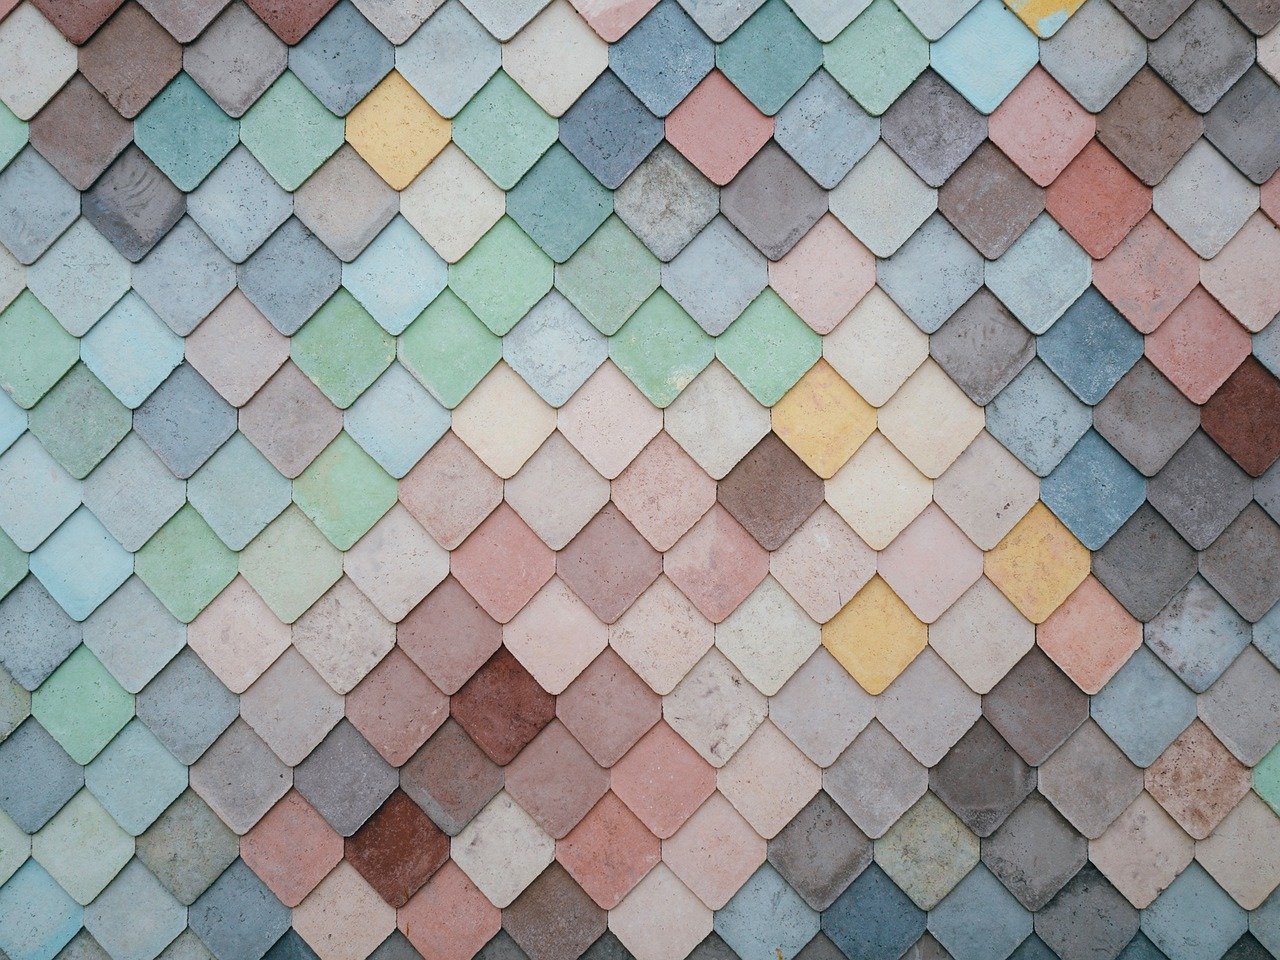 A close up of a colorful tiled roof.